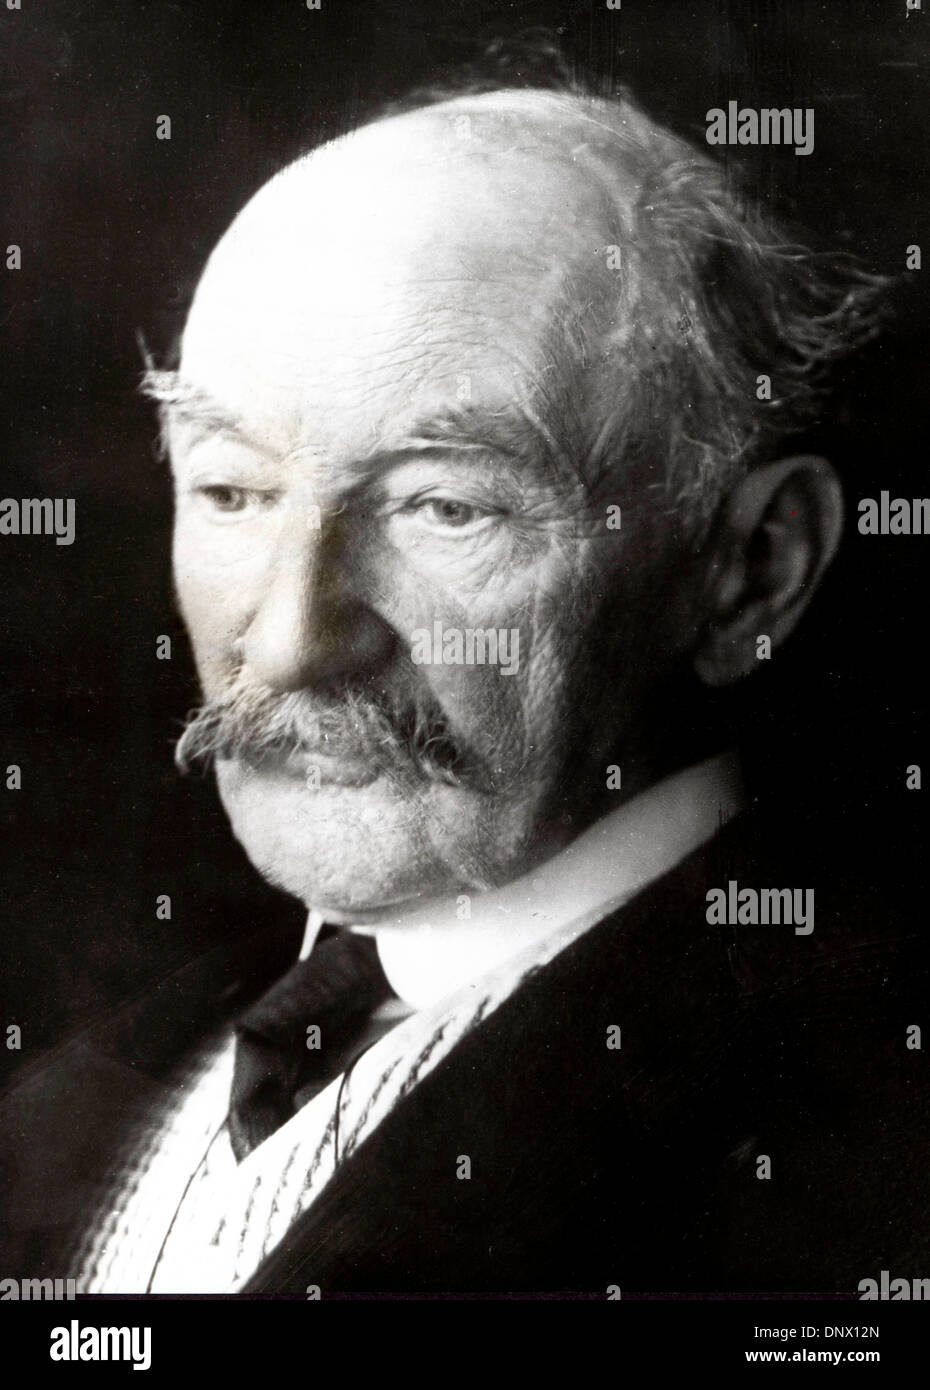 June 12, 1925 - London, England, U.K. - THOMAS HARDY was born on June 2nd, 1840 in Higher Bockhampton. In1853, Hardy's education becomes intensive , he studies Latin, French and begins reading widely. In 1856, Hardy meets and studies with Horace Moule, going through the Greek dramatists under his tutelage. In 1862 he travels to London to work under A. Blomfield. While finding his w Stock Photo